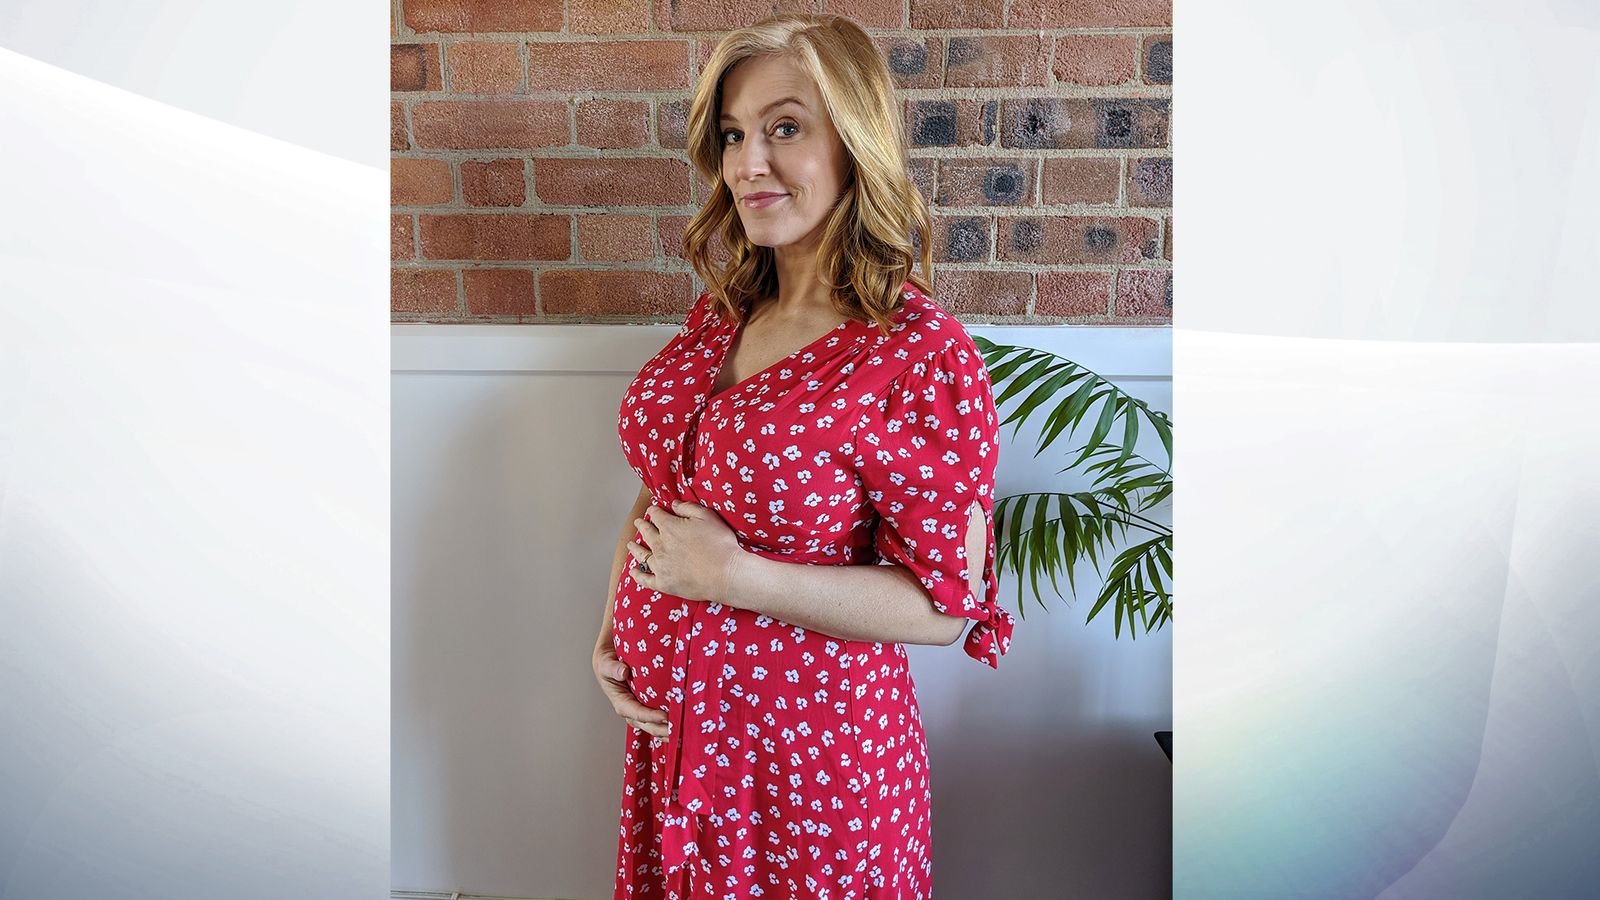 Sarah Jane Mee Shares Her Fears And Concerns As An